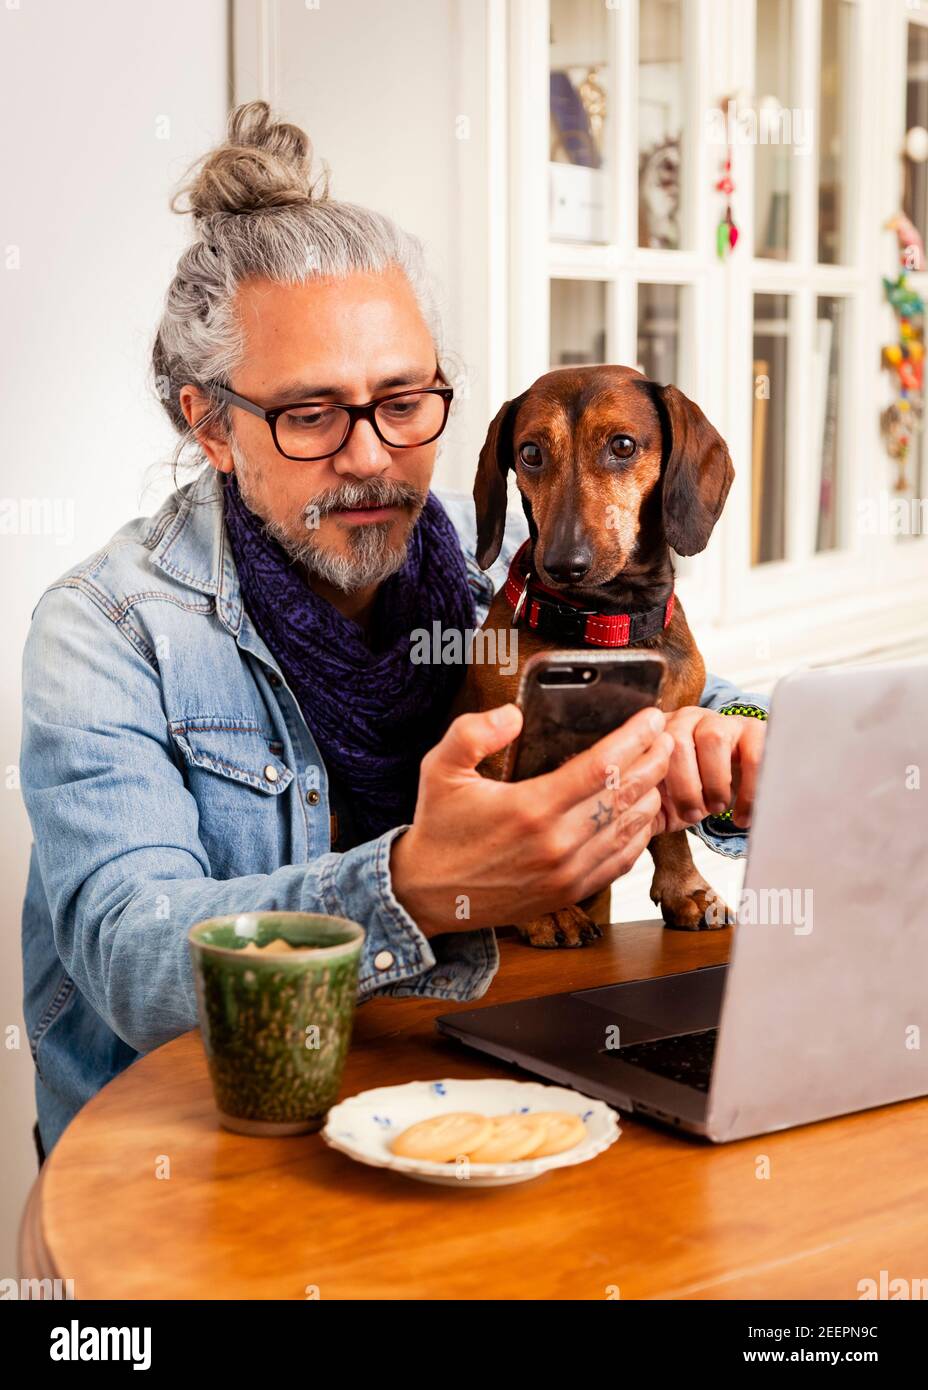 Handsome man working at home with laptop on the table together with his cute dog; concept: close relationship of dog and human Stock Photo